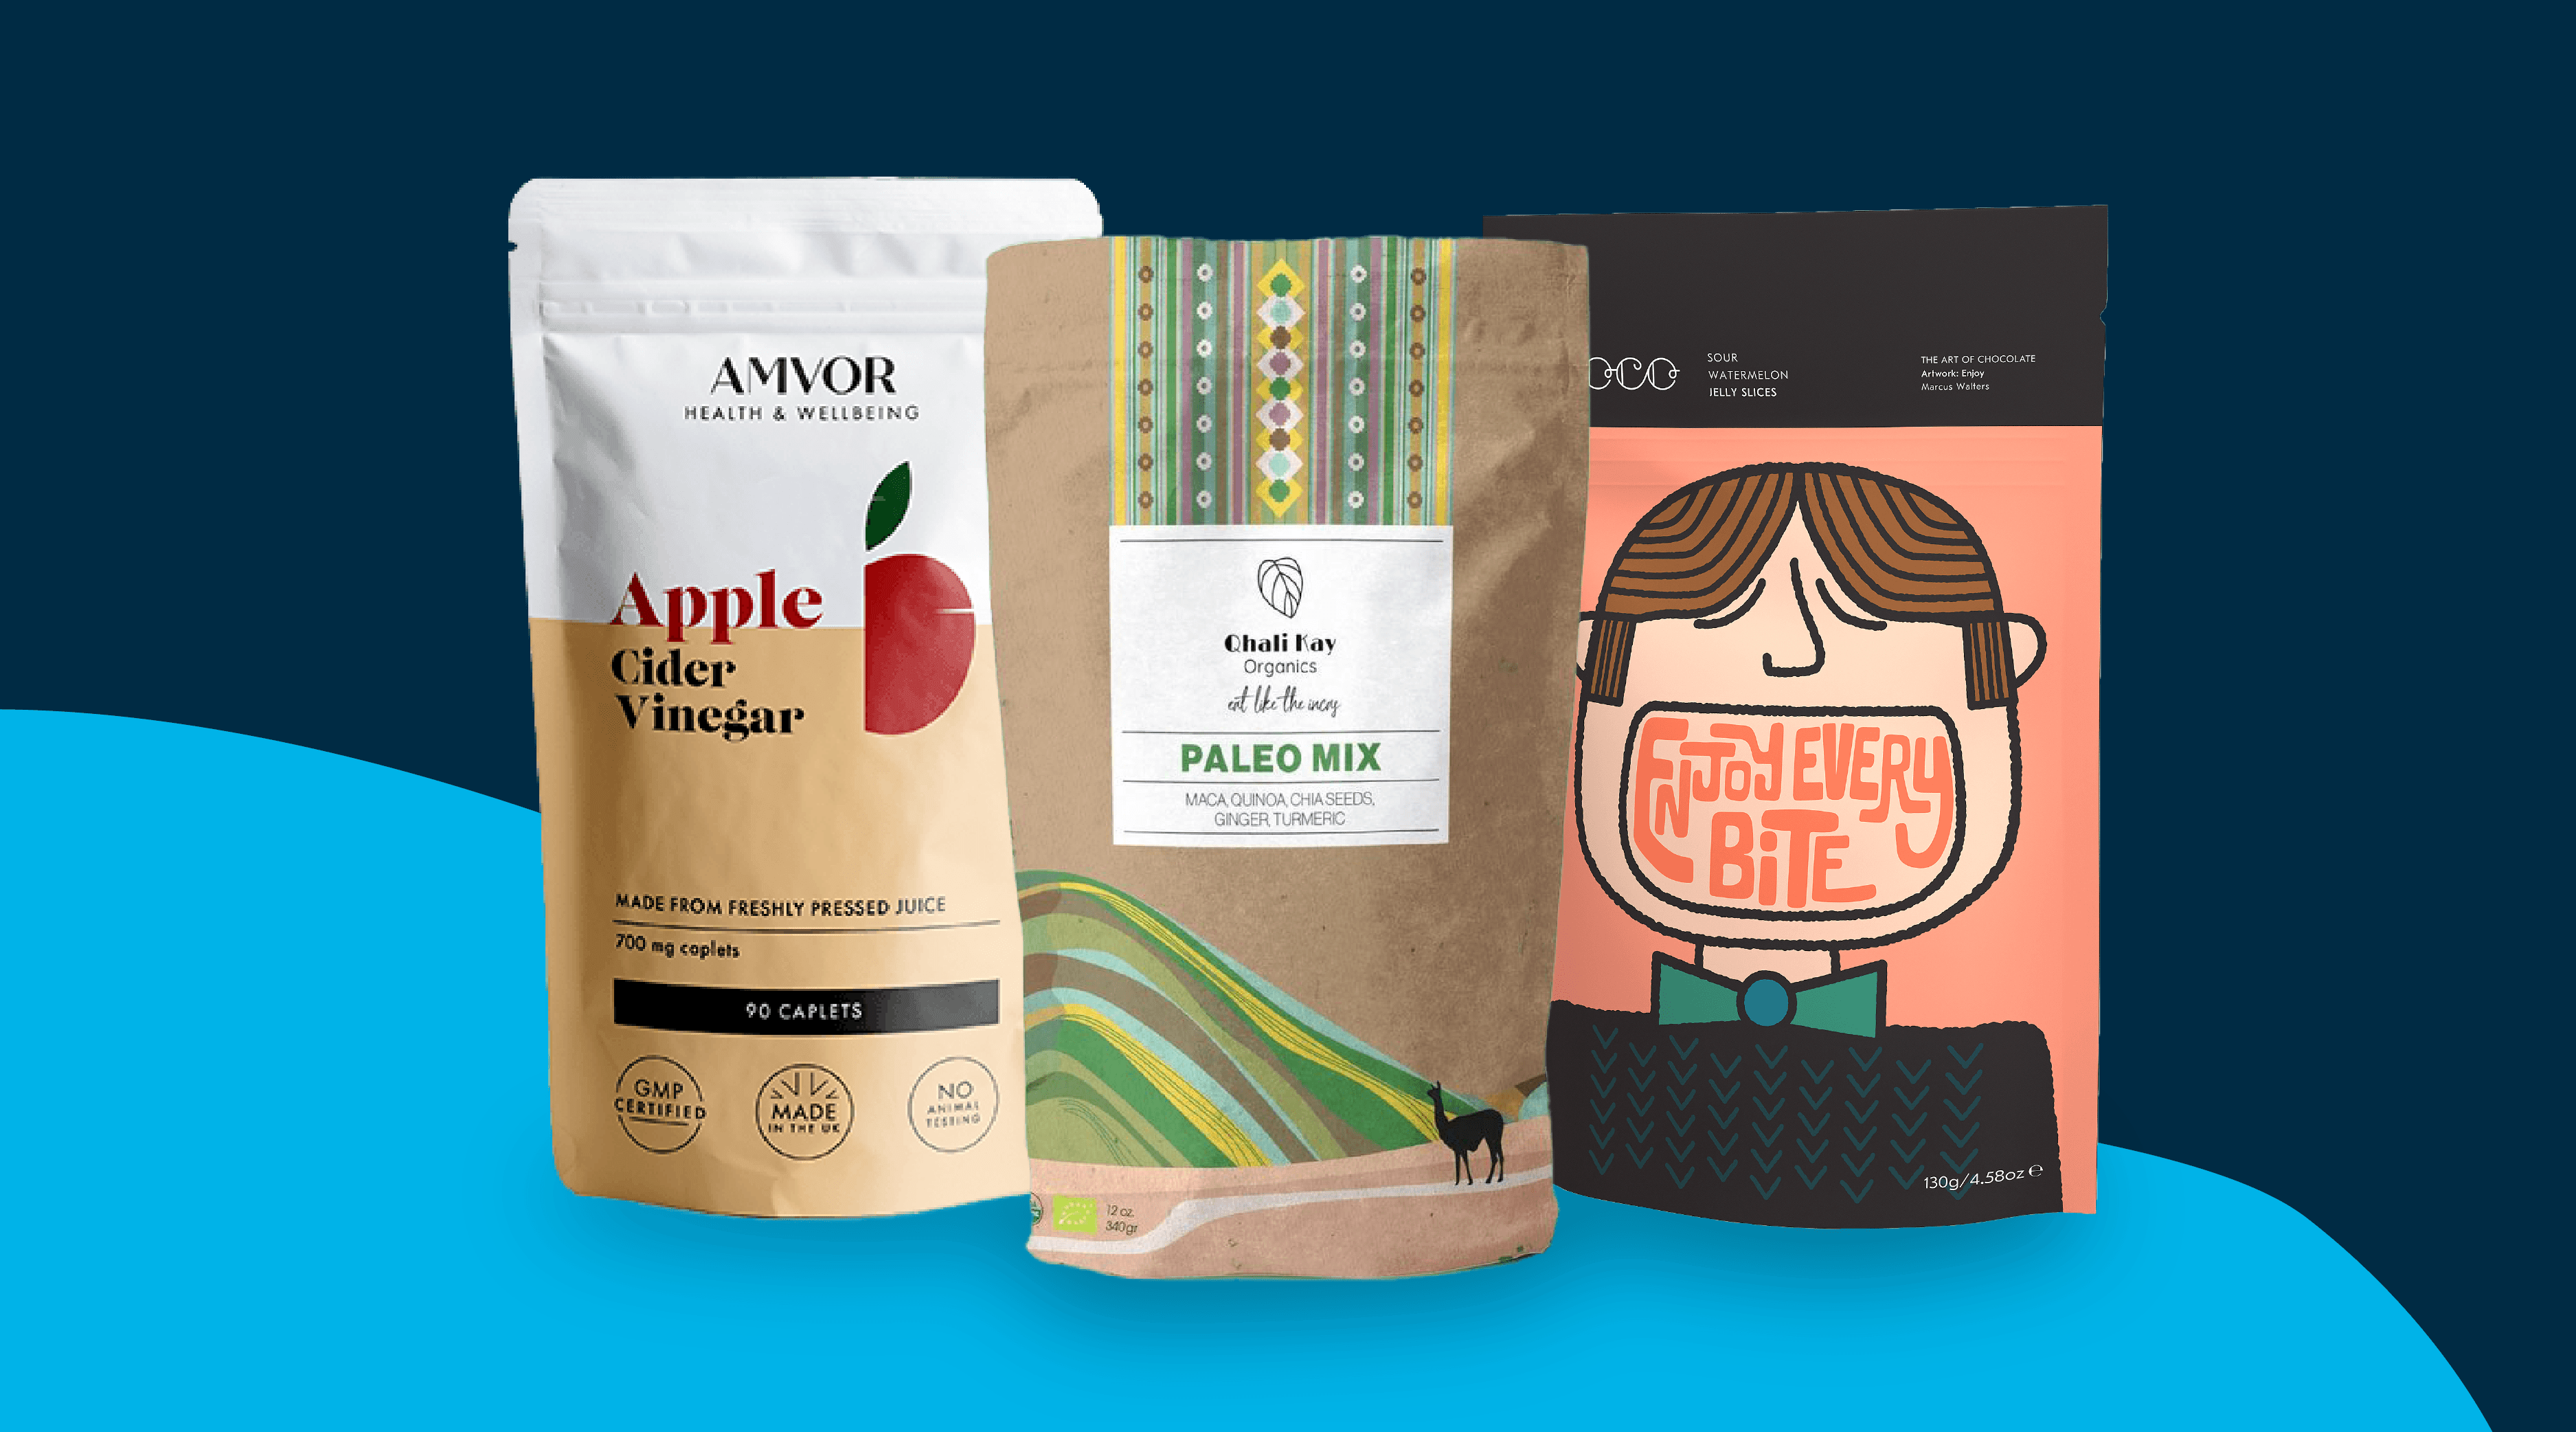 verrader band Medic 10 Product Packaging Design Trends to Look Out For in 2023 - Digitally  Printed Packaging Designs | ePac